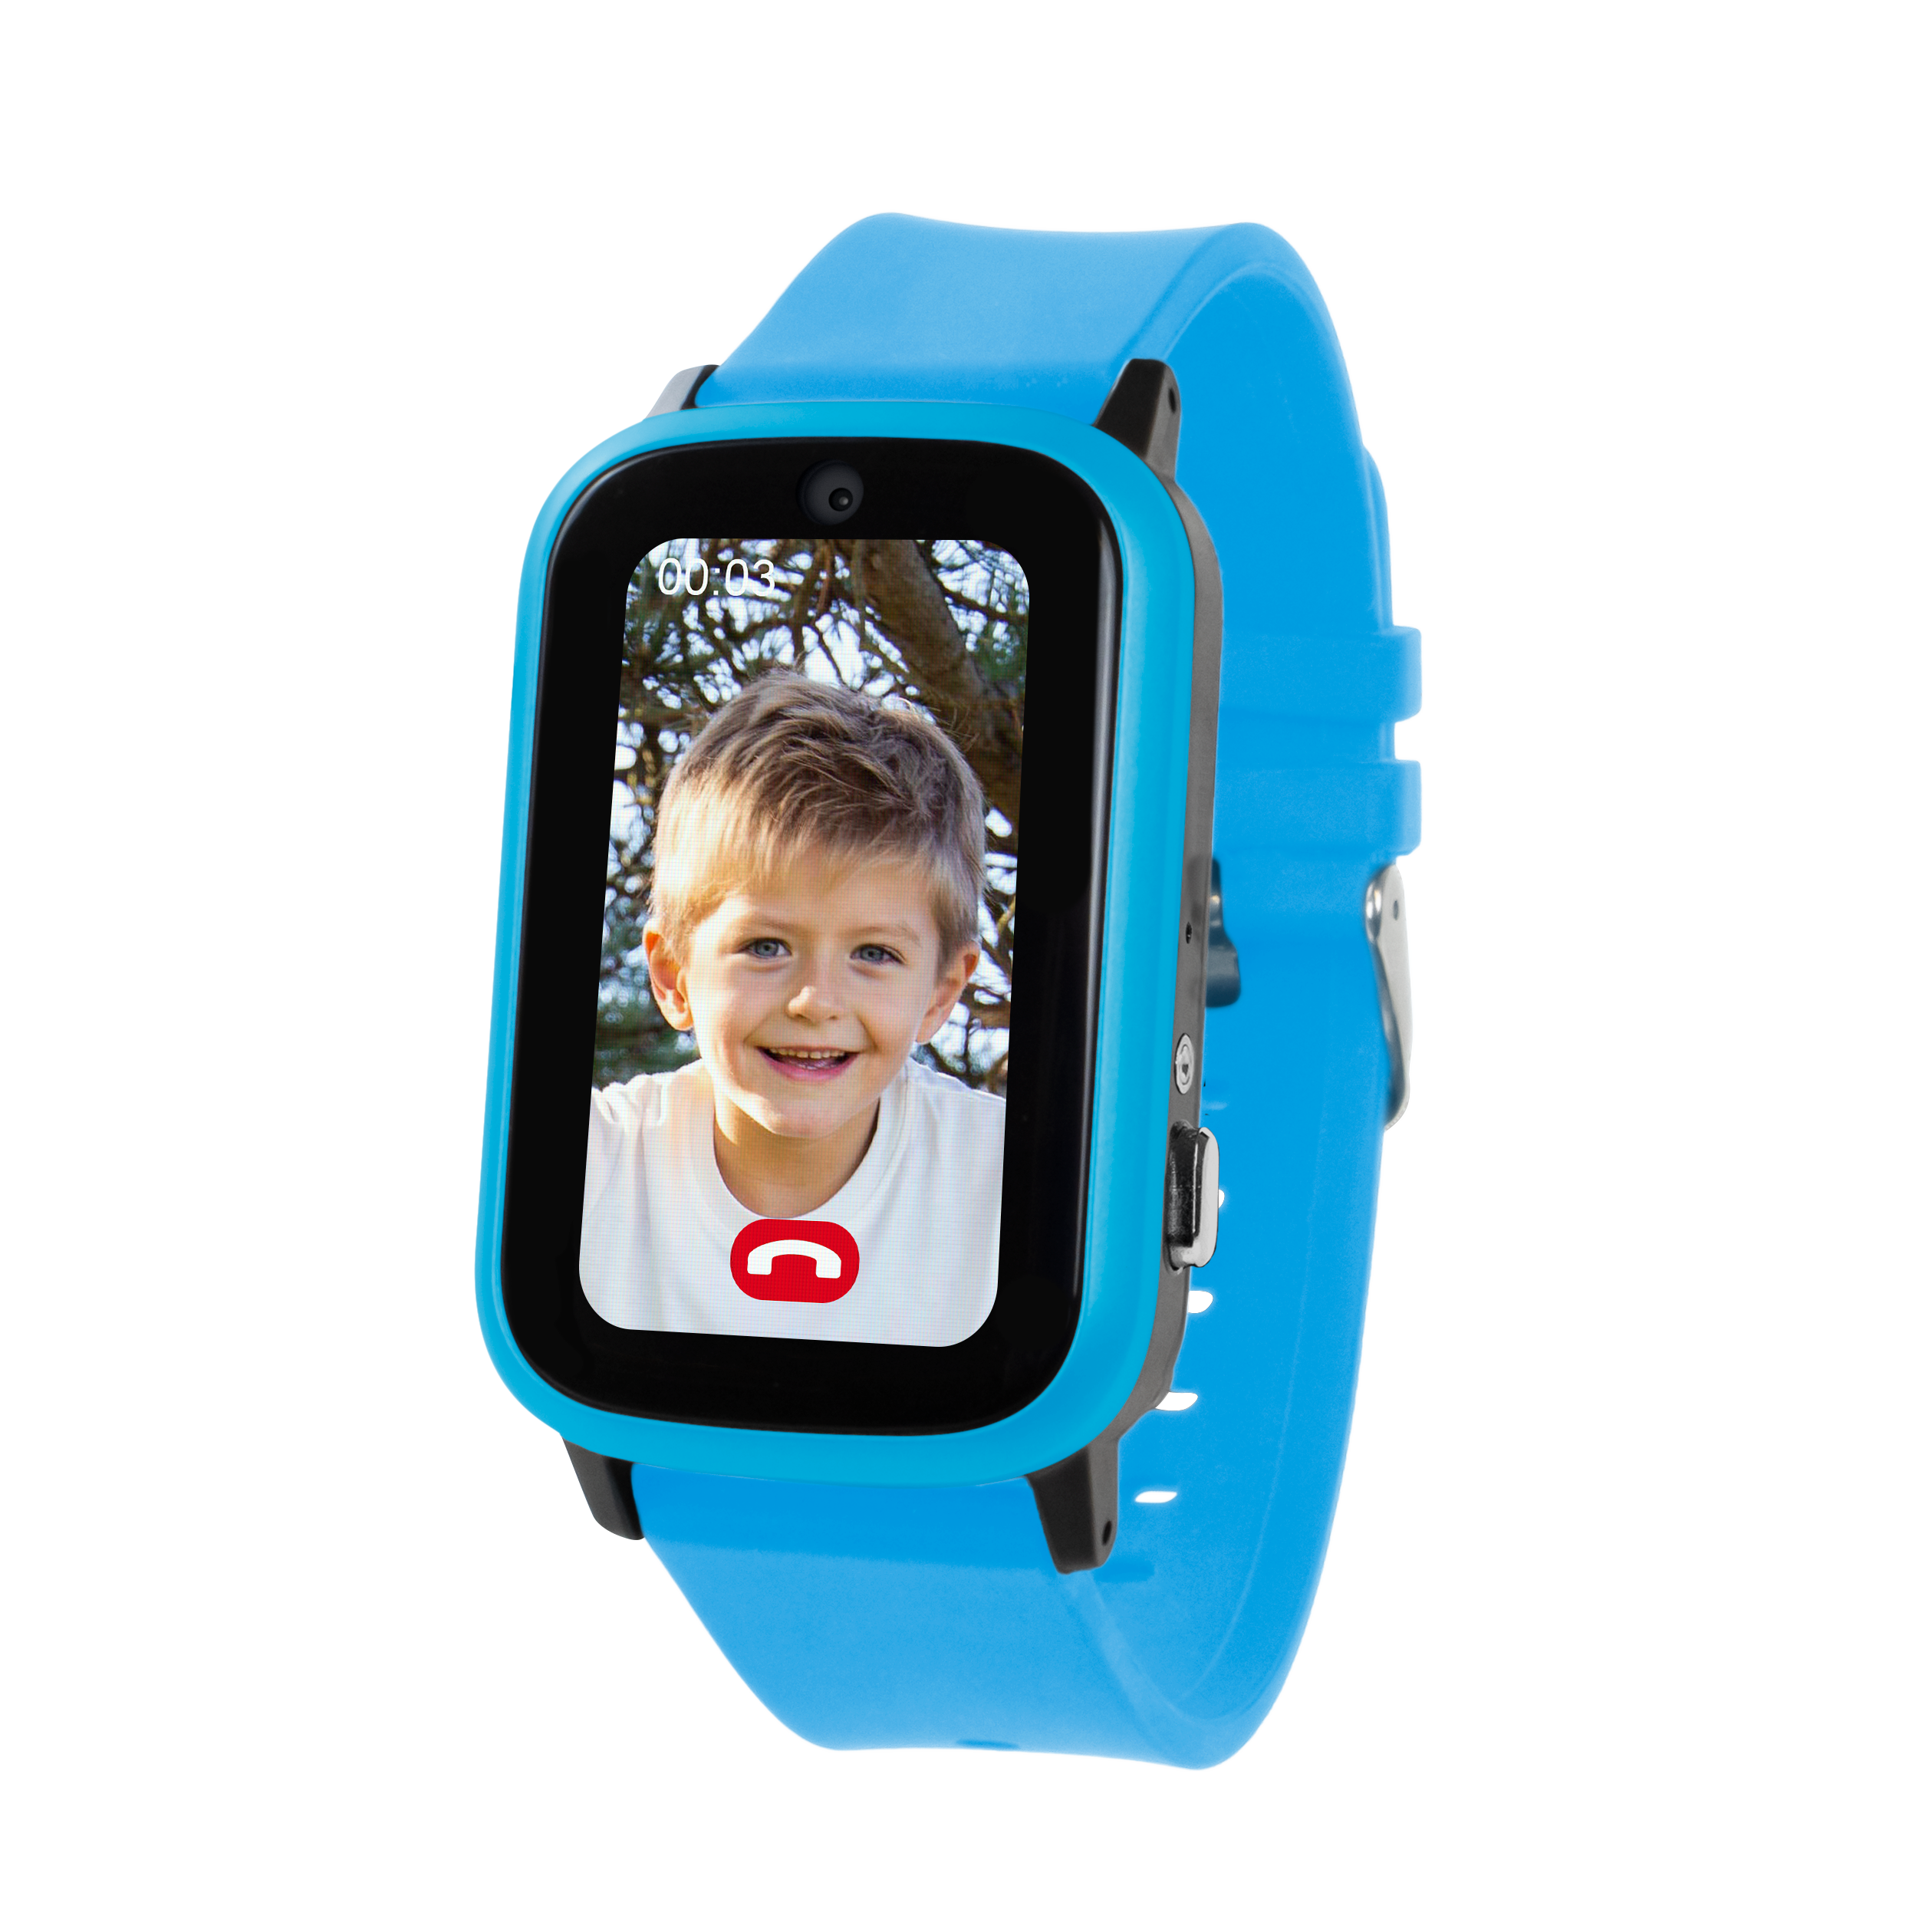 Connect Blau Up, Smartwatch, ONE2TRACK Kinder